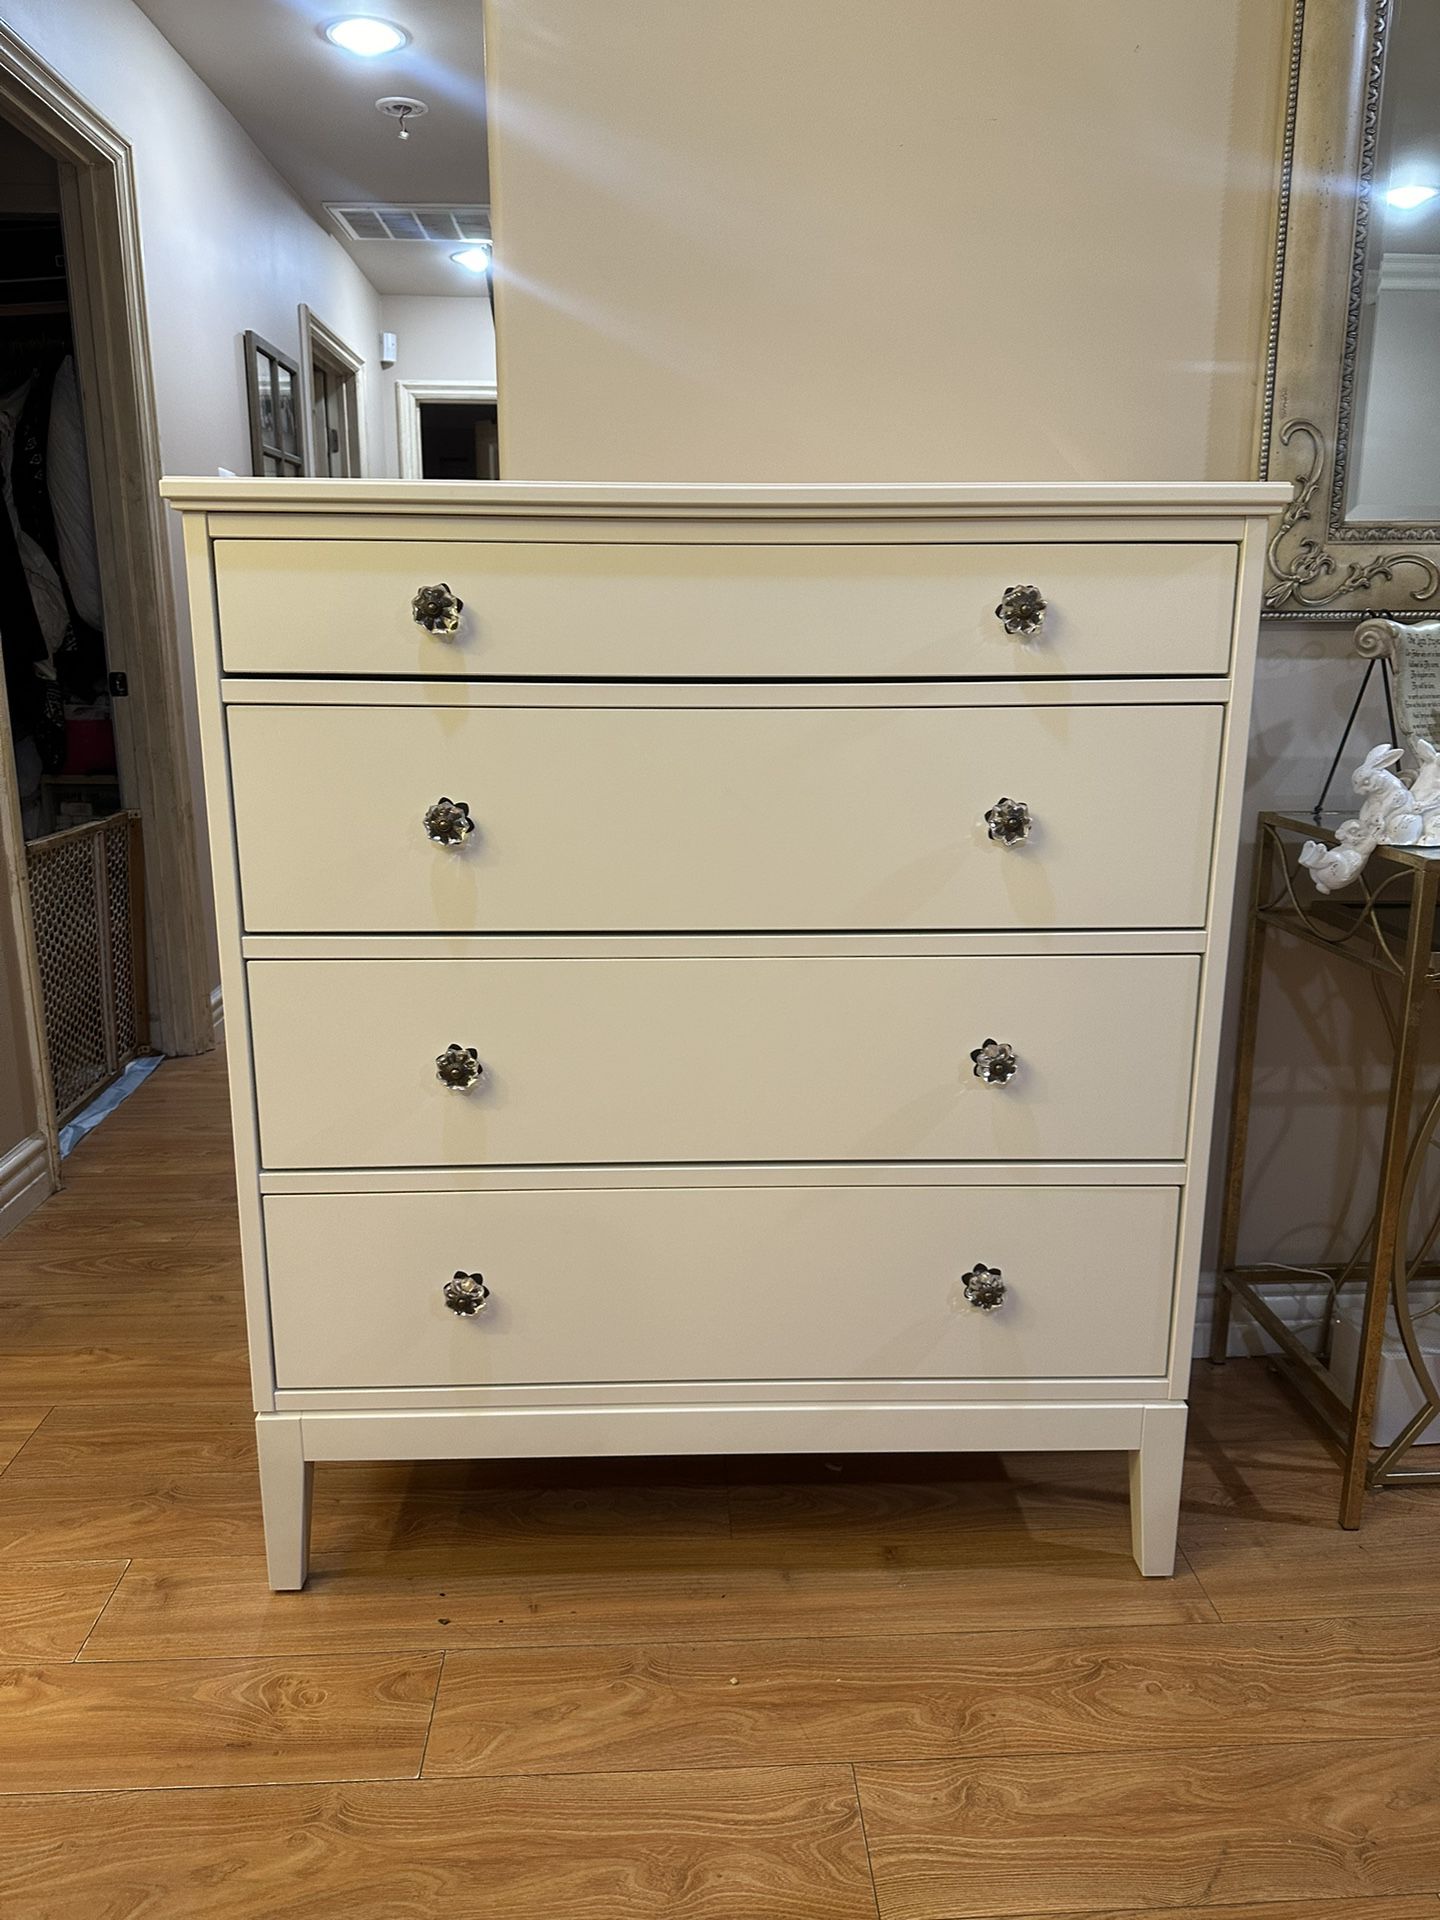 IKEA Dresser ( Delivery Is Available )